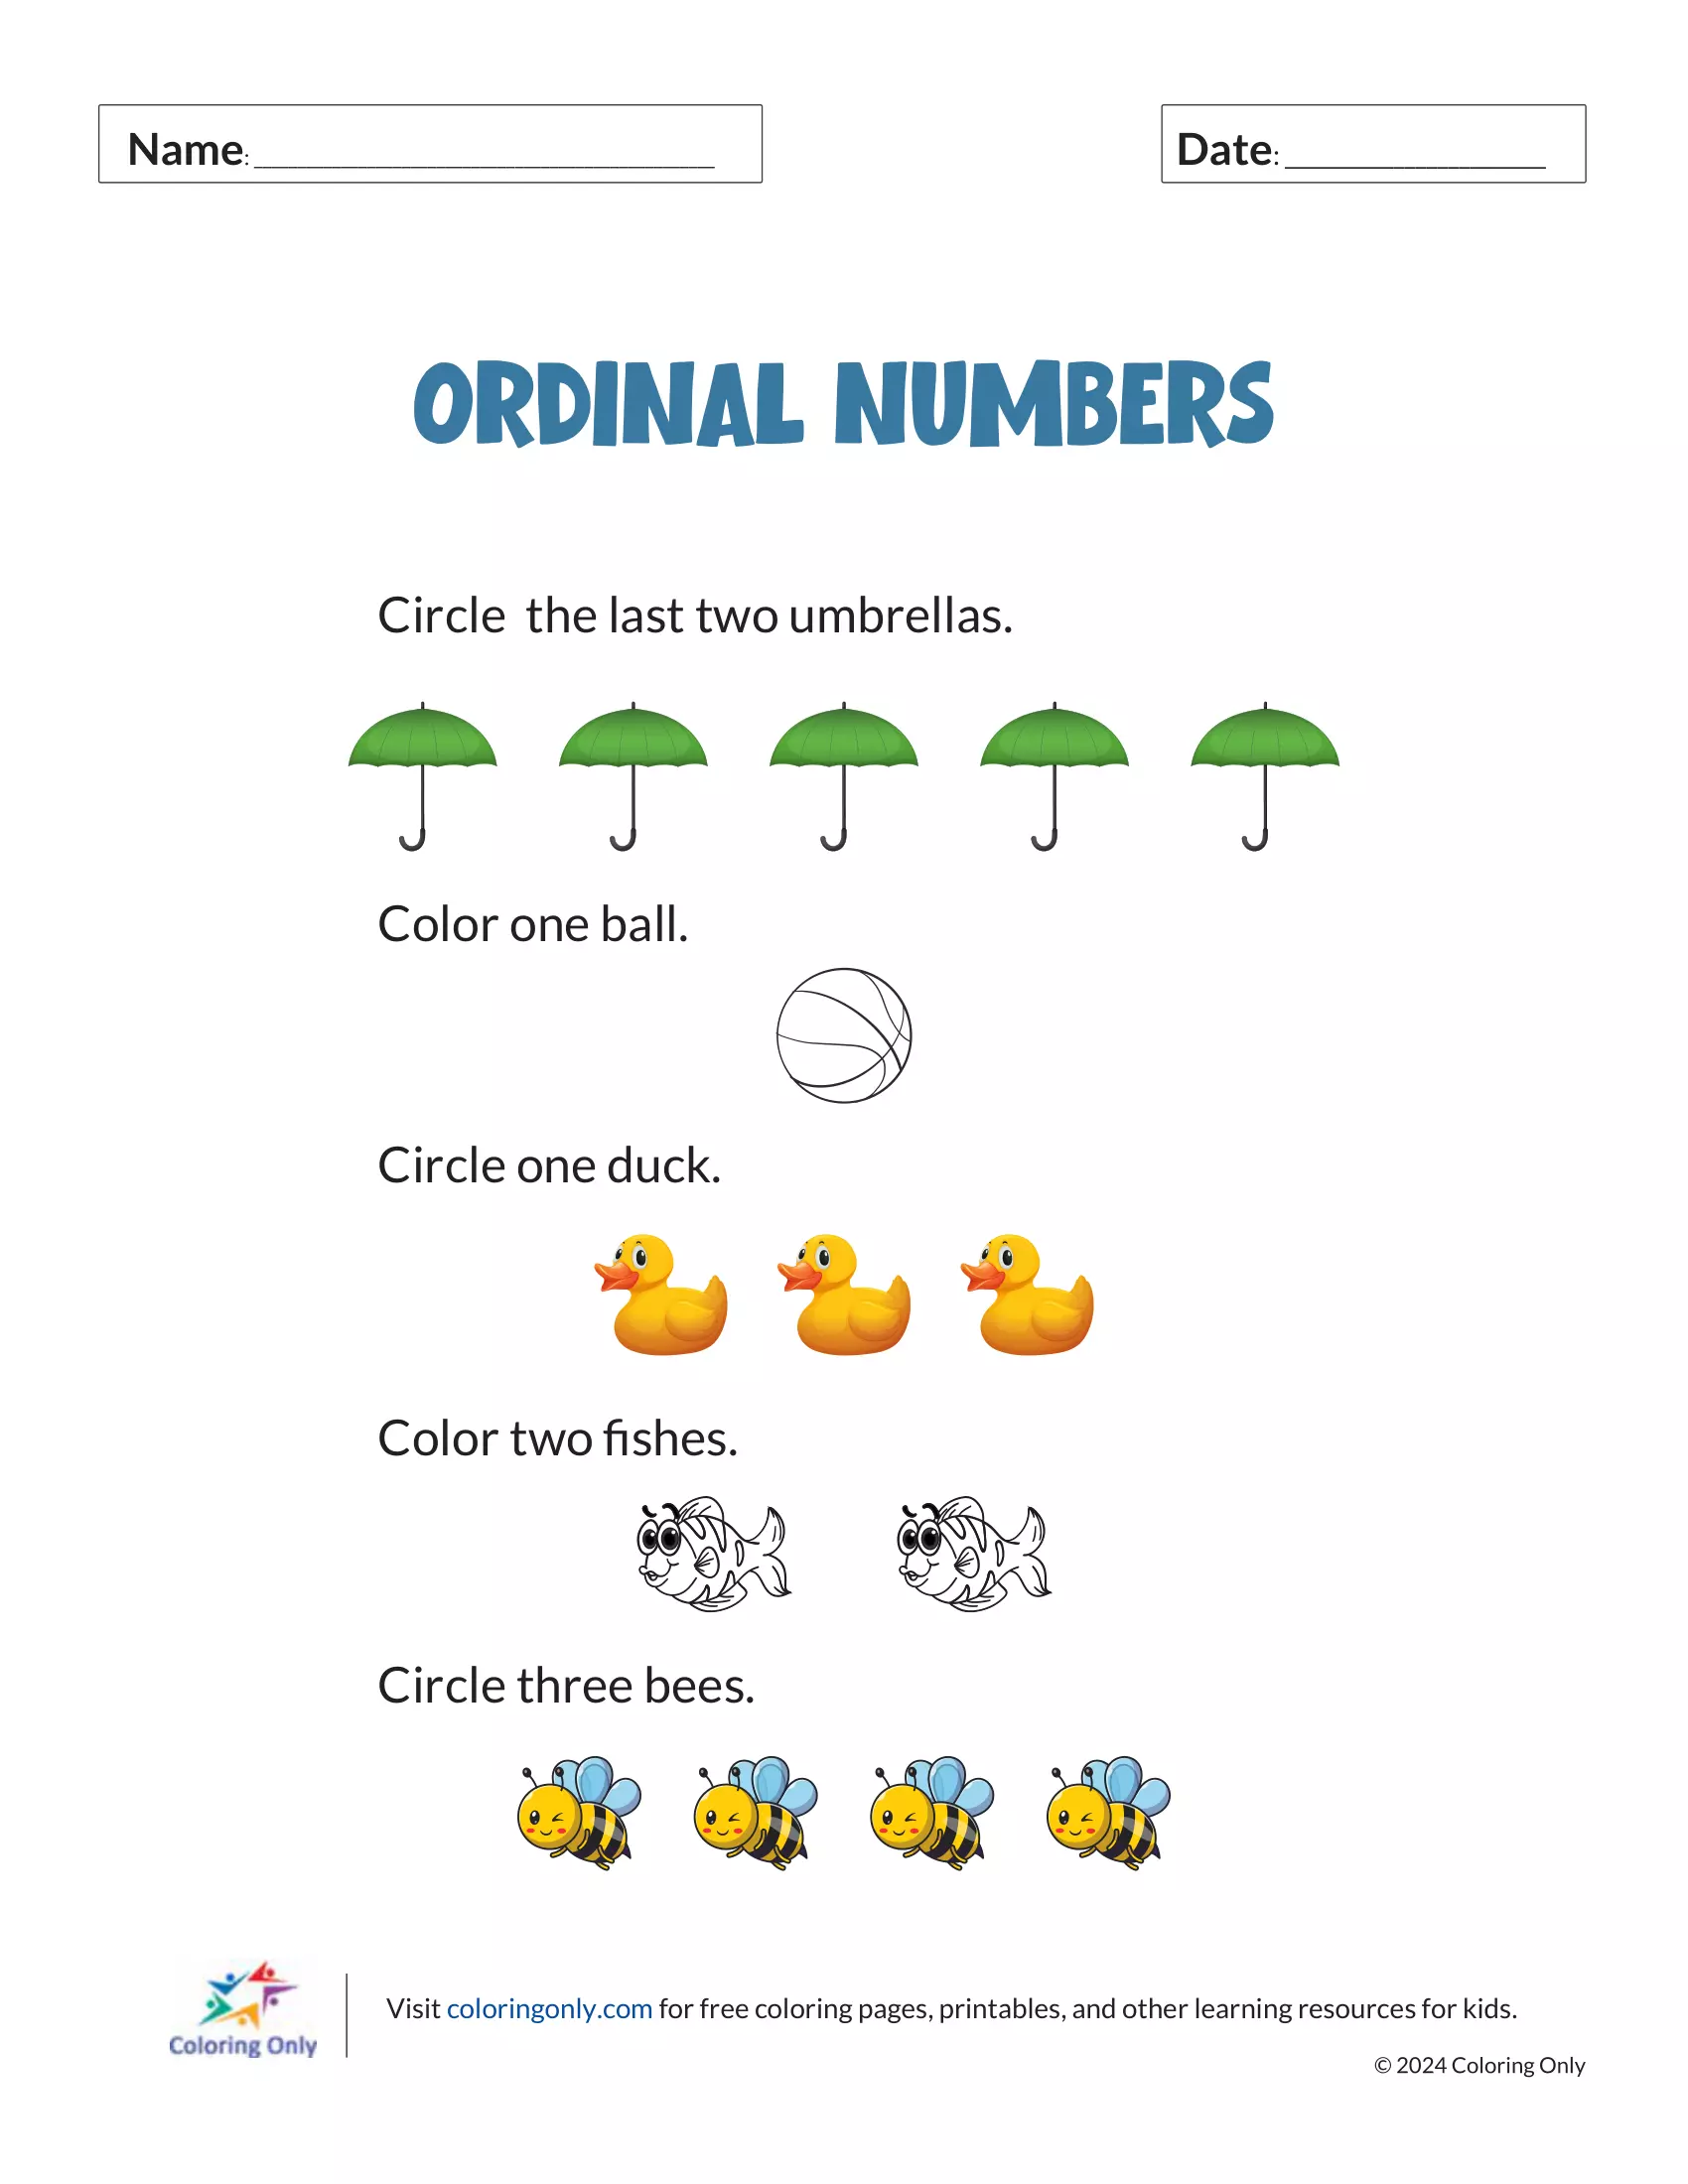 Teach kids ordinal numbers and early counting with this colorful "ORDINAL NUMBERS" free printable worksheet. Perfect for preschoolers to enhance fine motor skills and recognition.